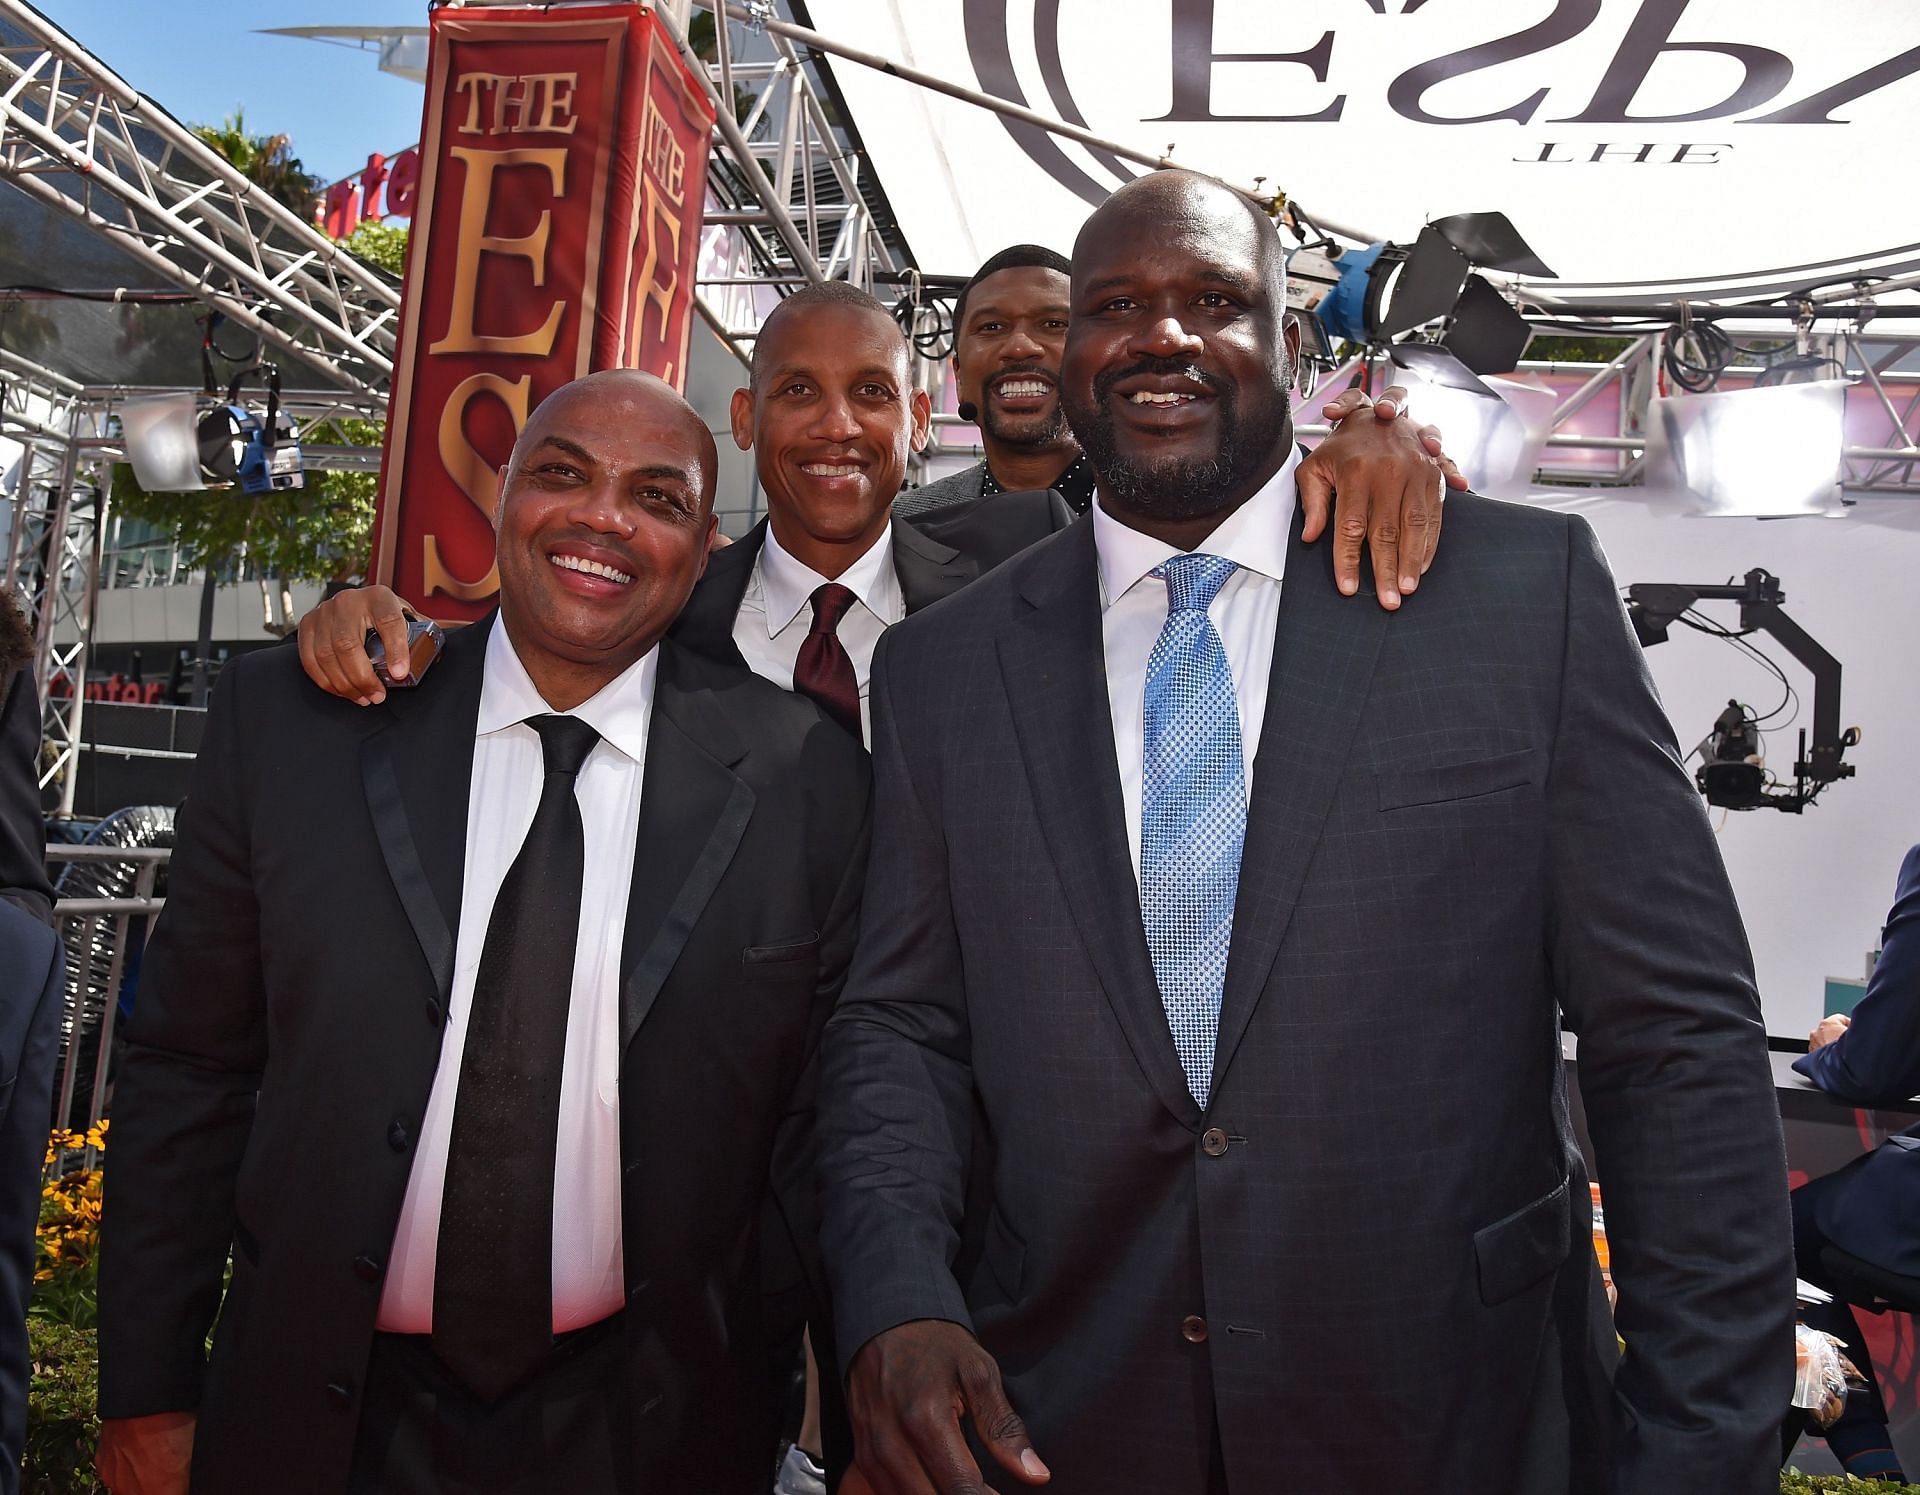 Charles Barkley Responds To Charles Oakley's Tweet That He Is A Coward